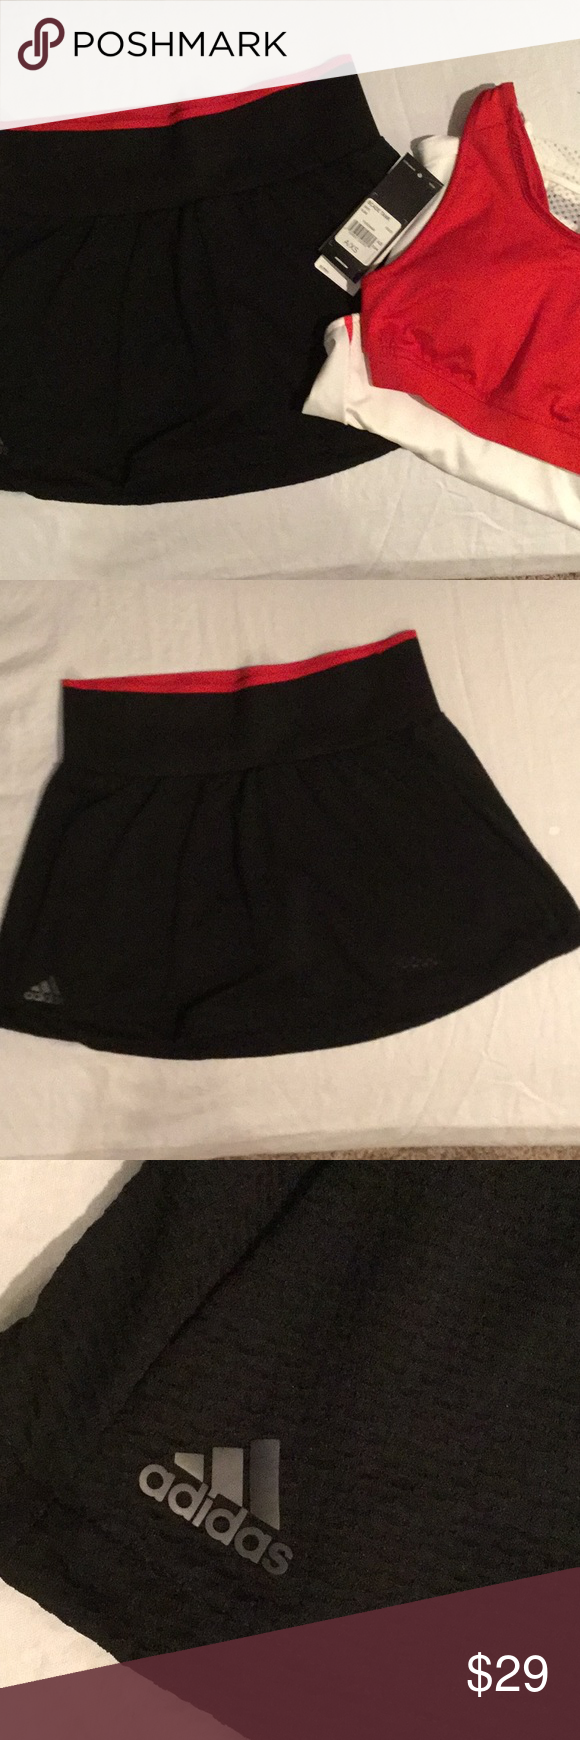 Adidas Black & Red Tennis Skirt Brand New with Tags. Adidas workout/Tennis Skirt…